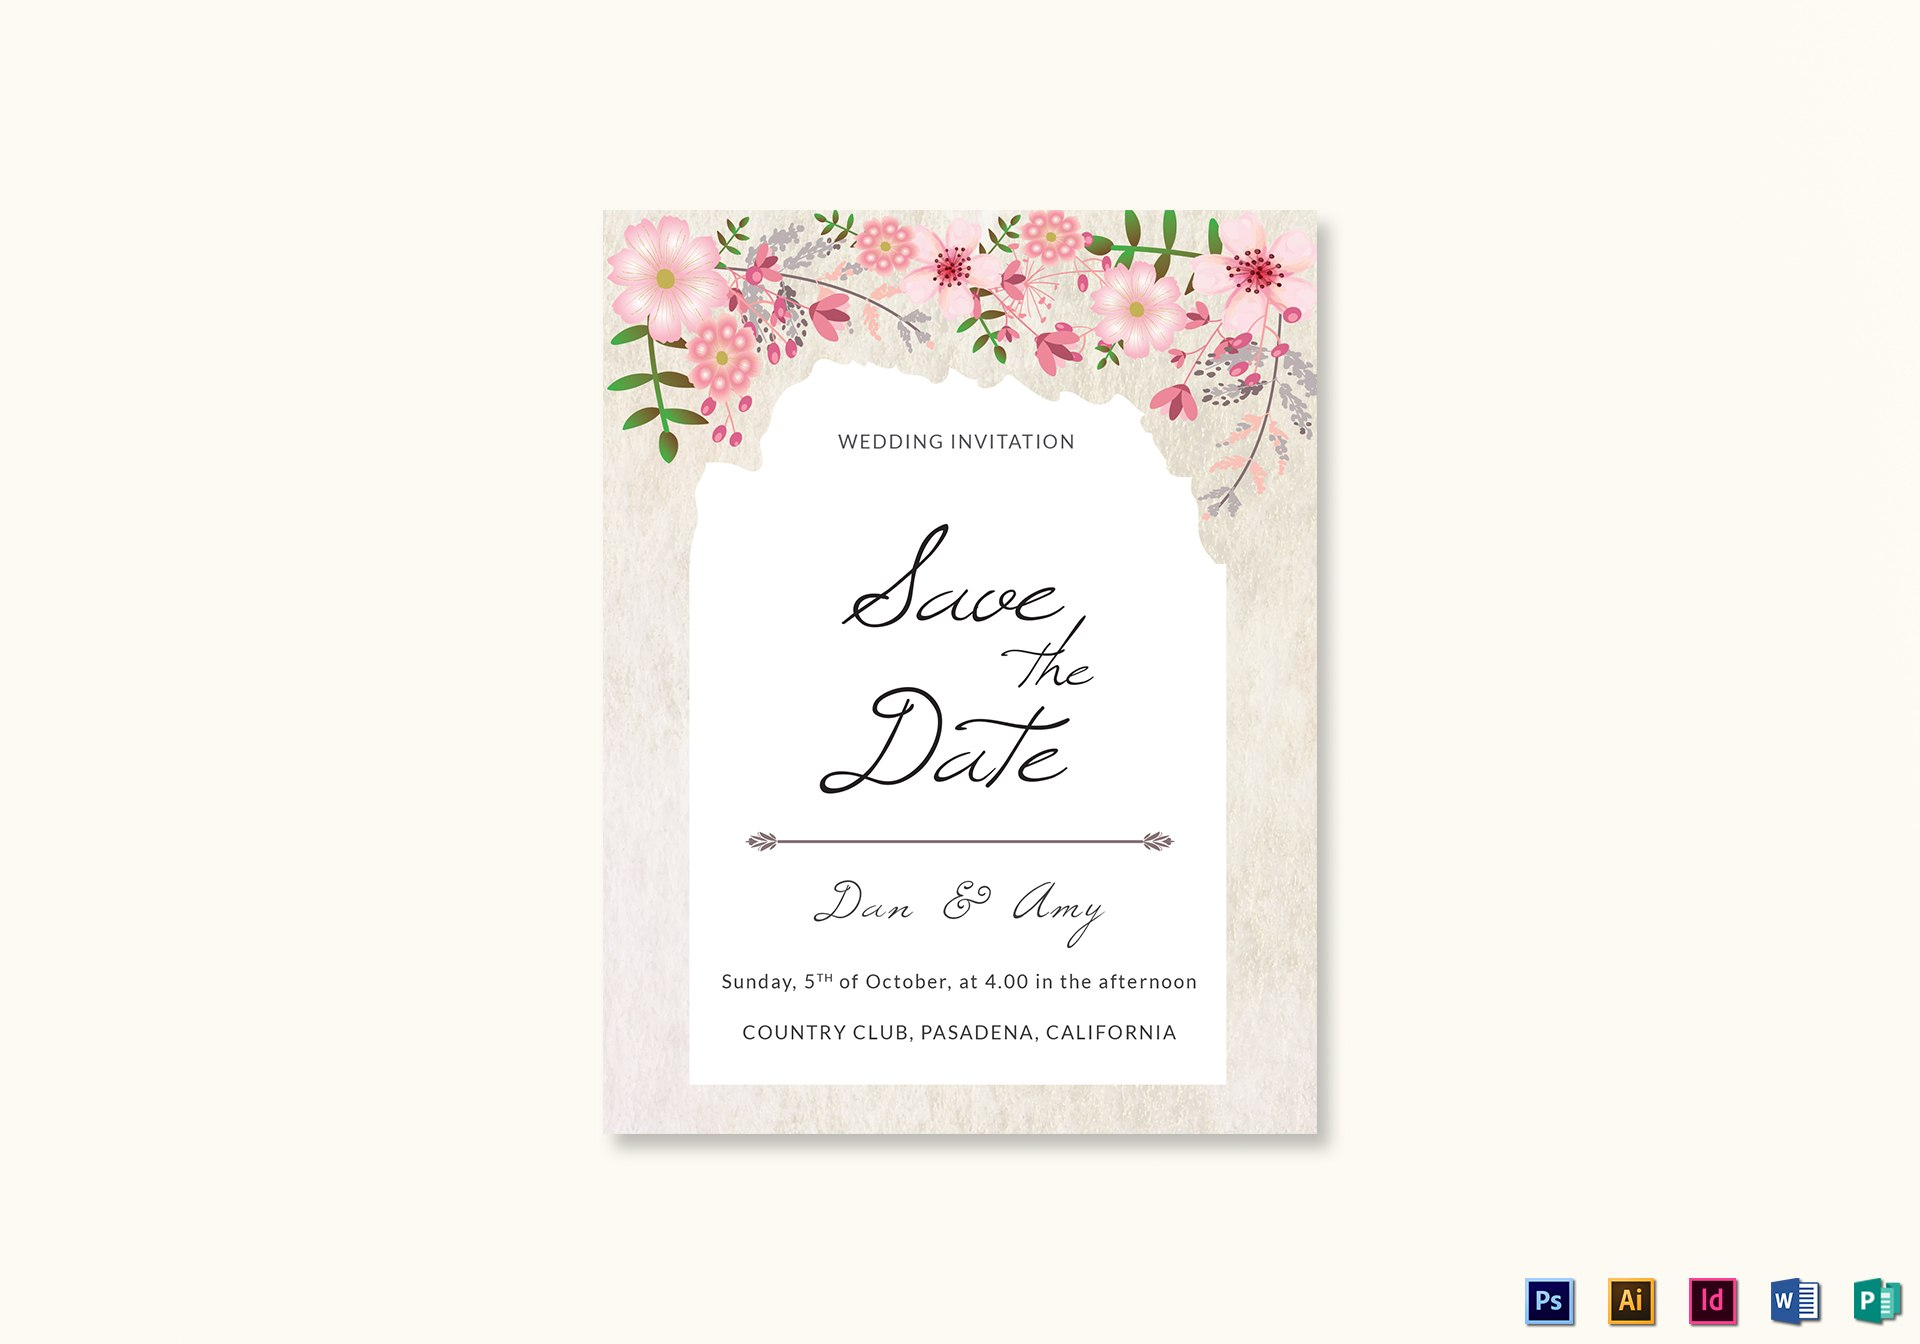 Pink Floral Save The Date Card Design Template In Psd Word intended for Save The Date Cards Templates